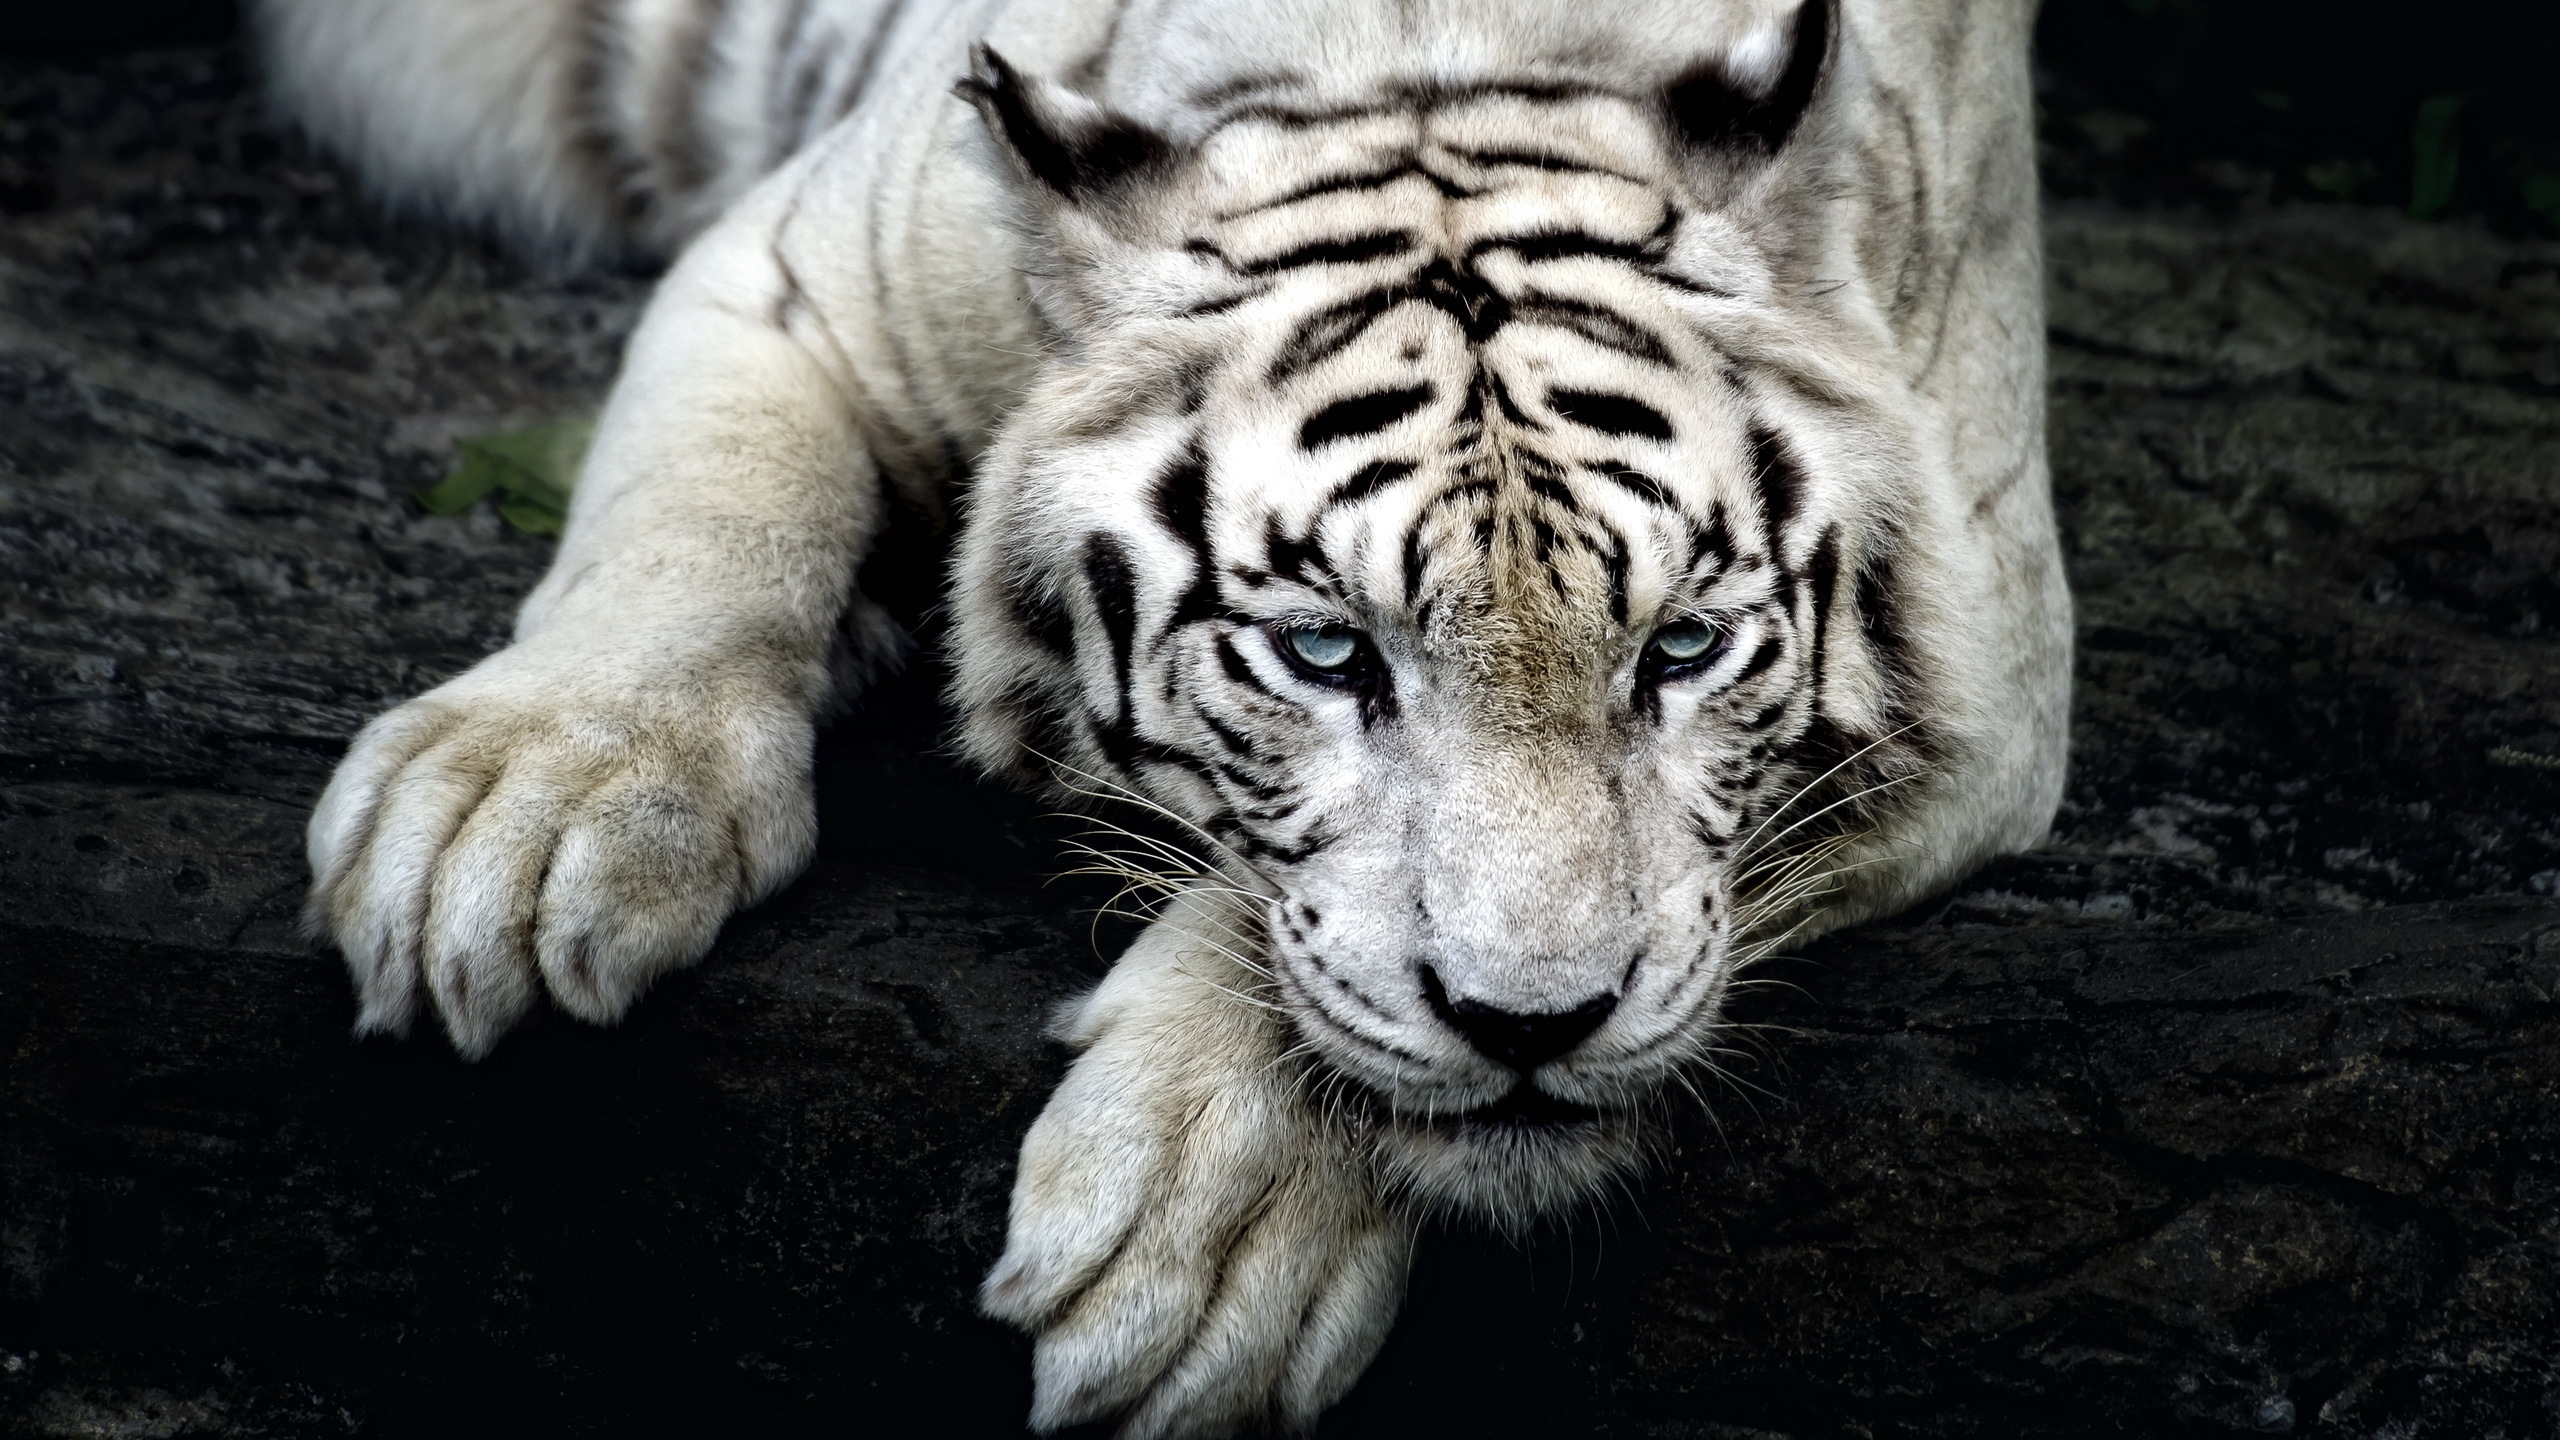 Amazing White Tiger for 2560x1440 HDTV resolution